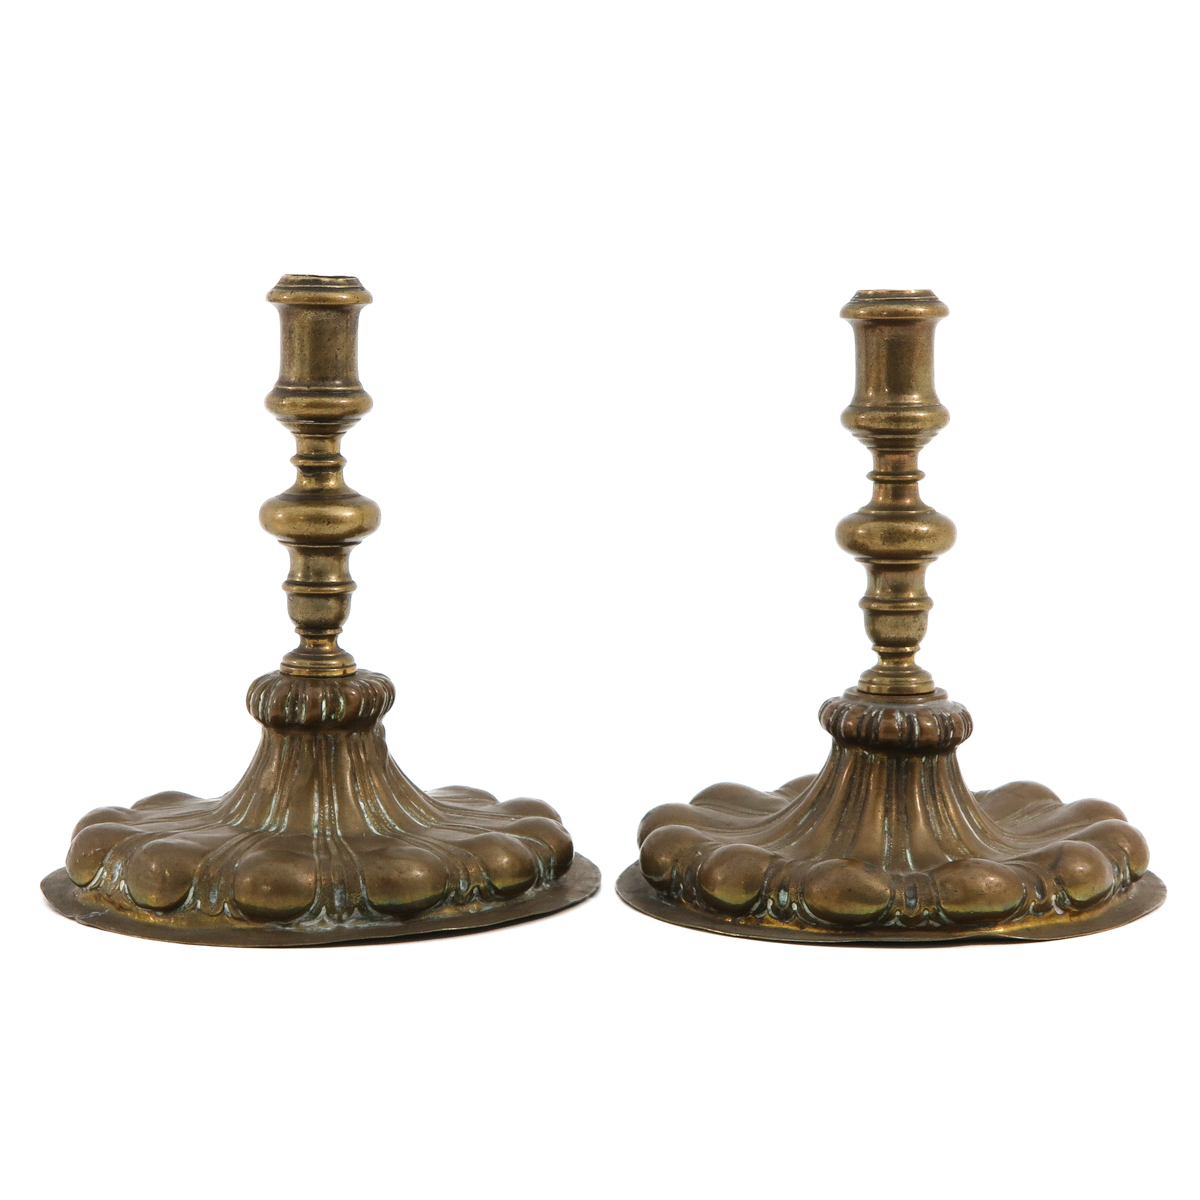 A Pair of 17th Century Italian Candlesticks - Image 2 of 8